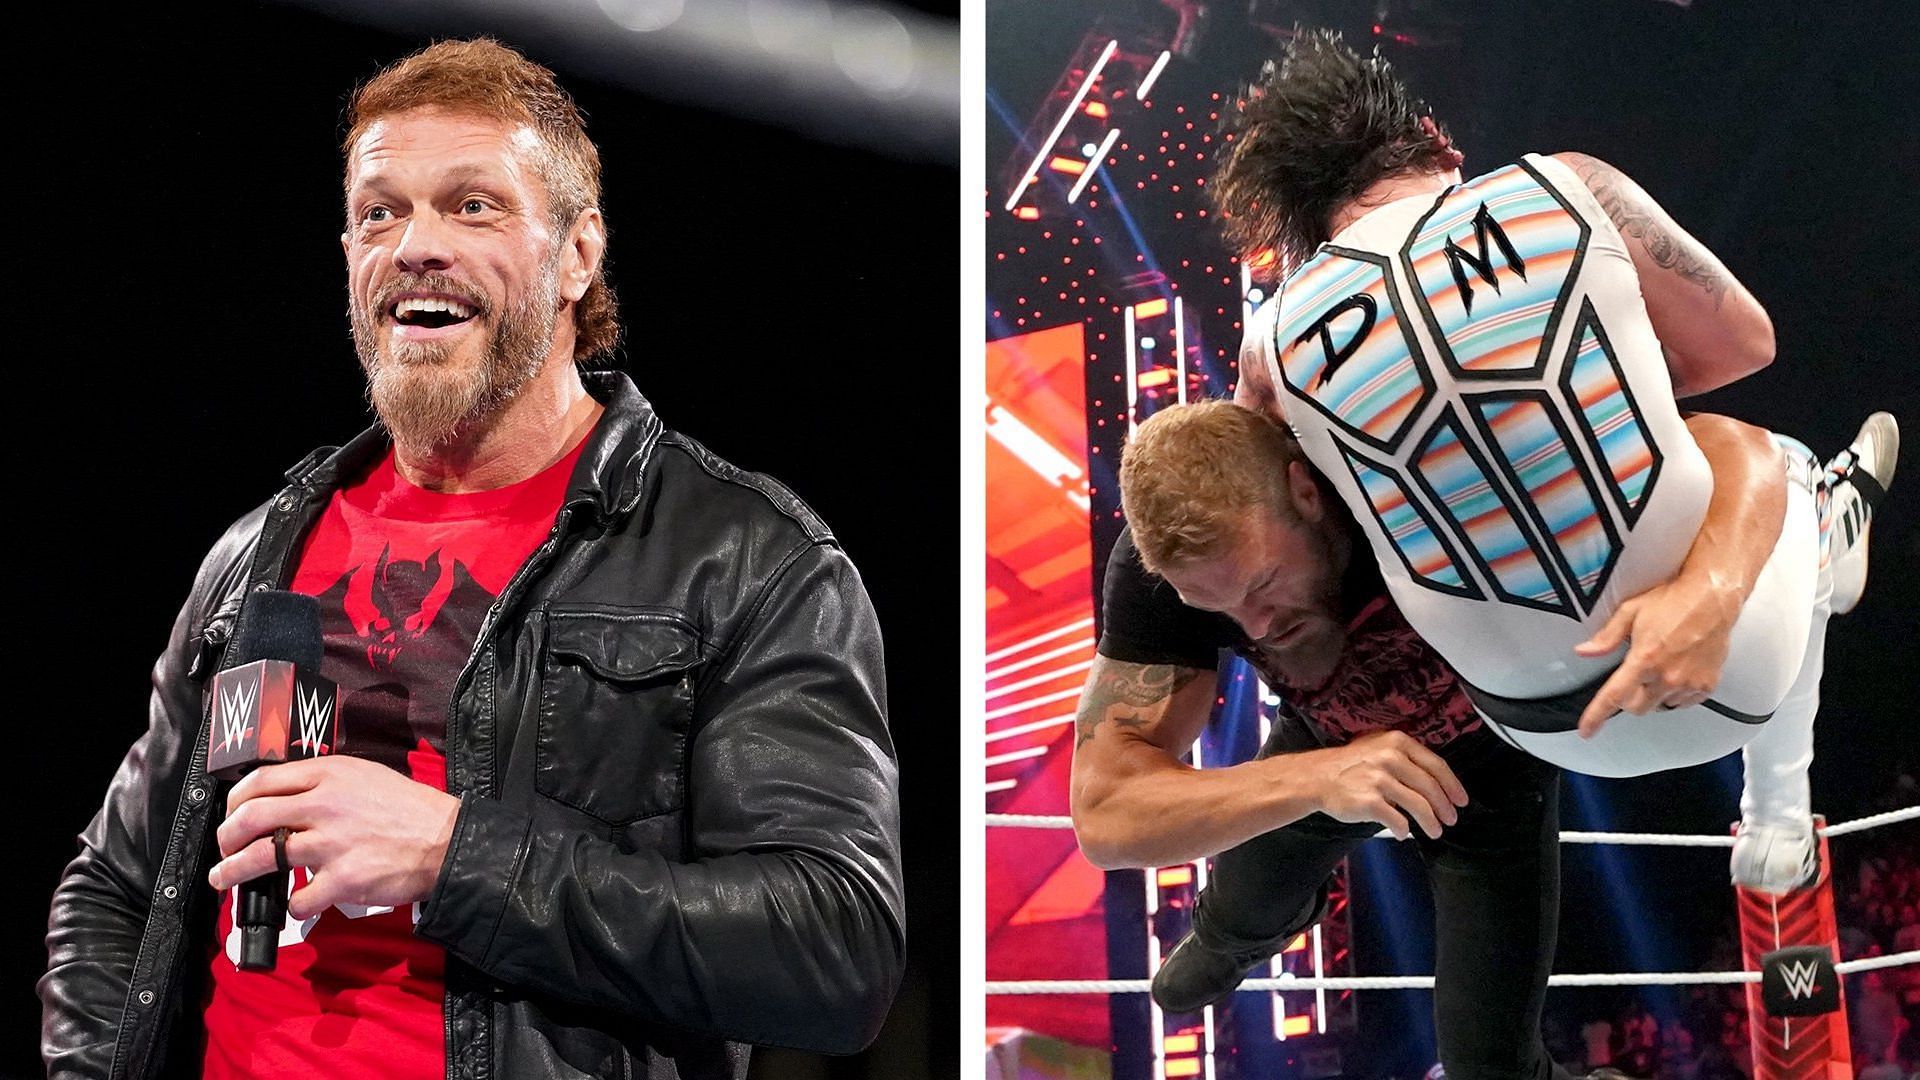 Edge could relive several major rivalries before his WWE career comes to an end